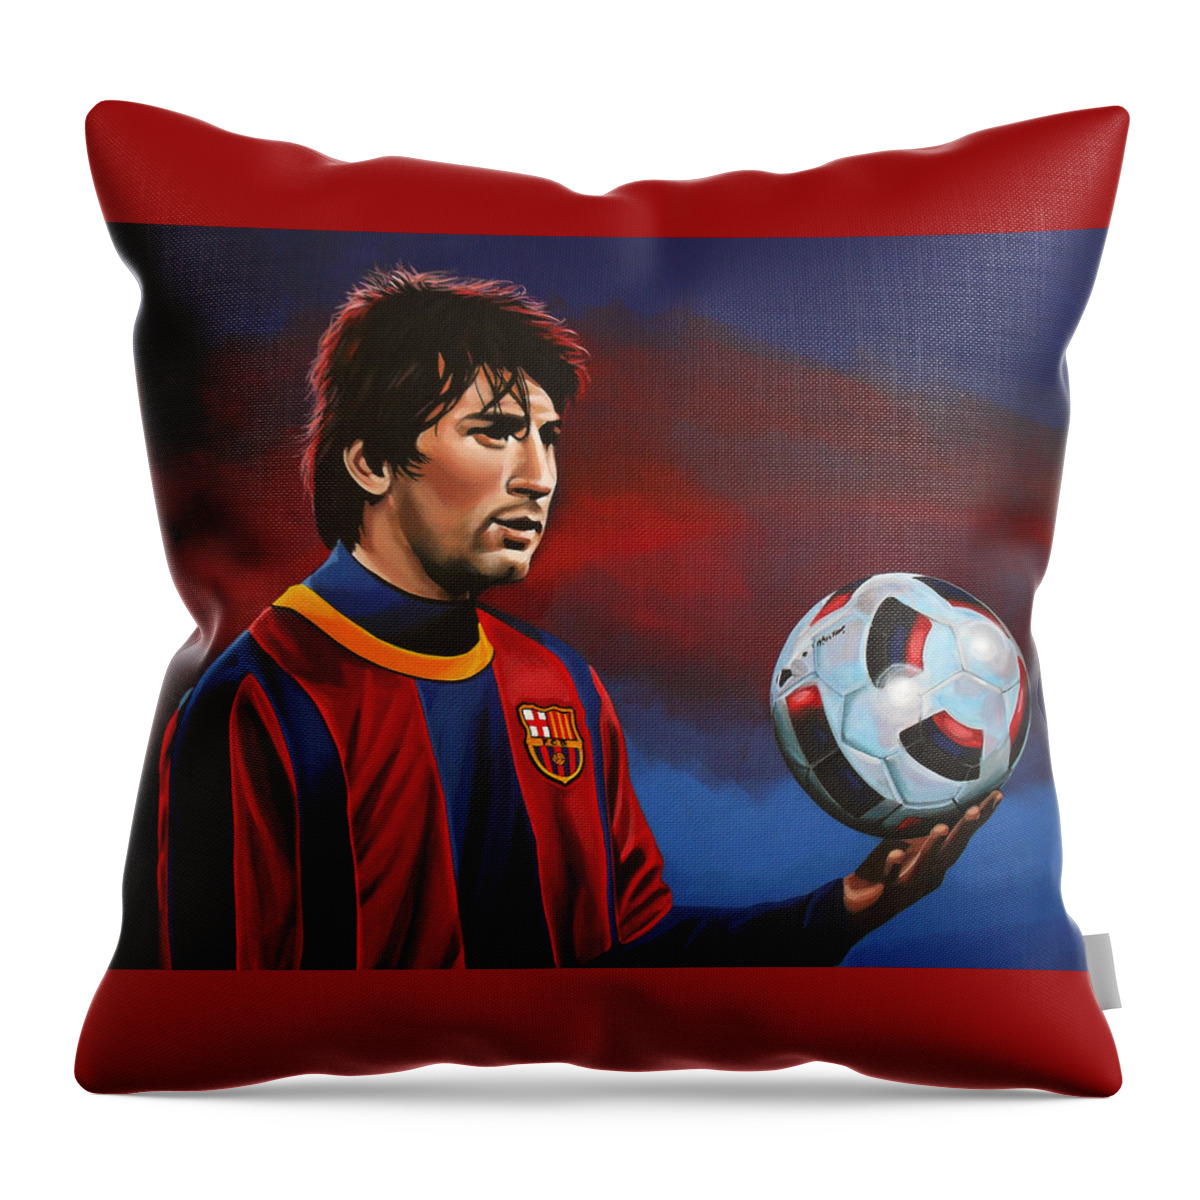 Lionel Messi Throw Pillow featuring the painting Lionel Messi 2 by Paul Meijering